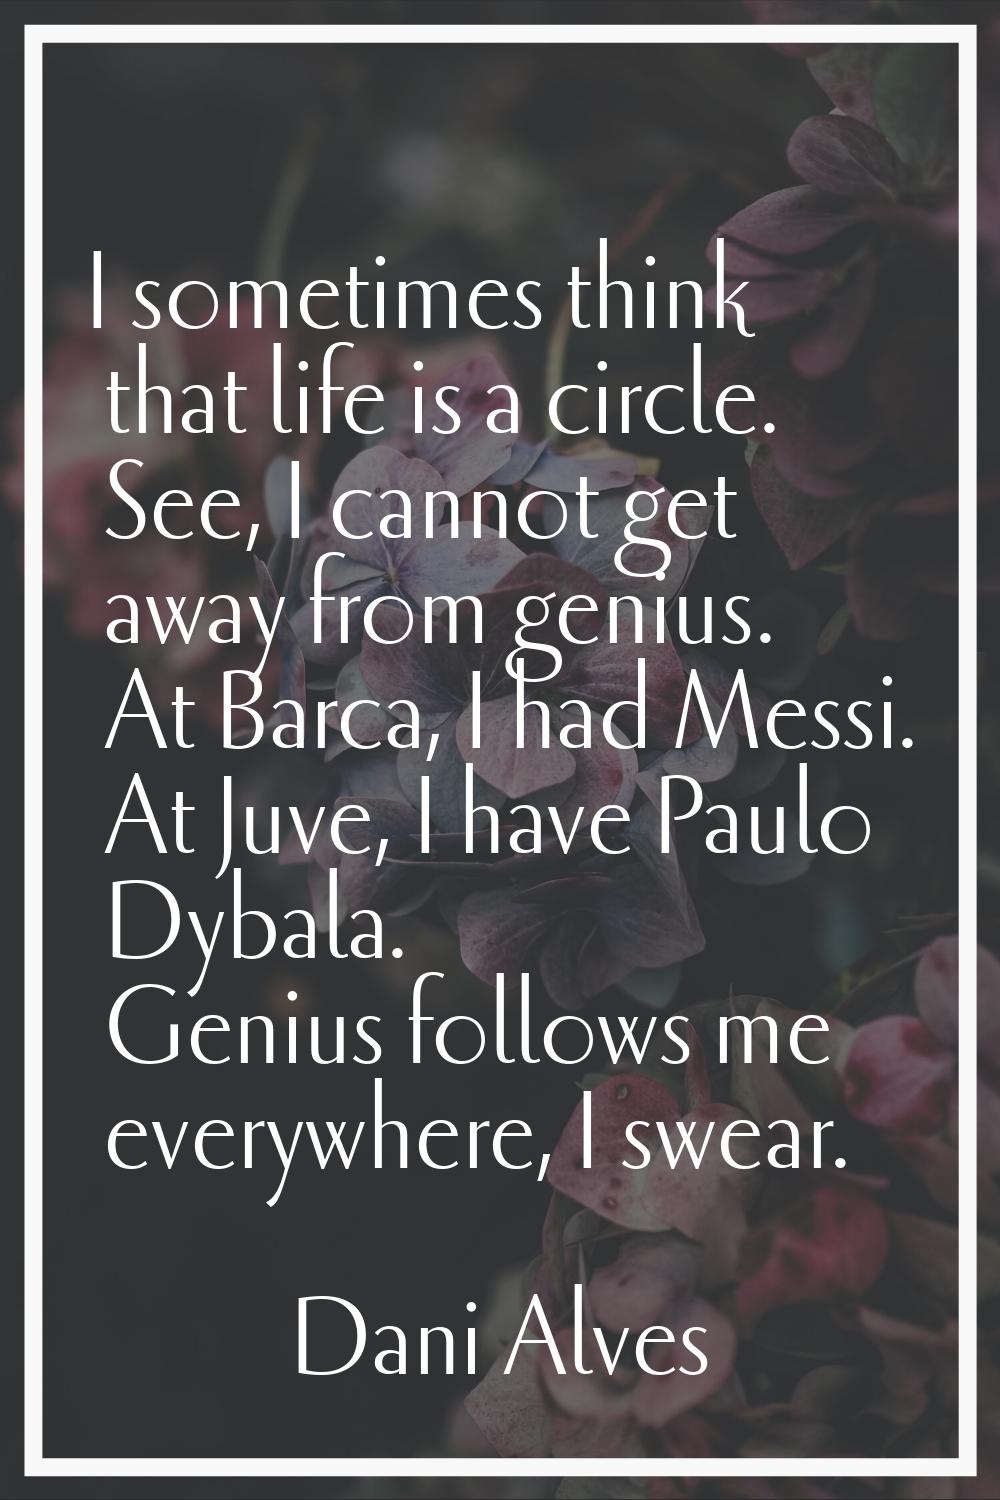 I sometimes think that life is a circle. See, I cannot get away from genius. At Barca, I had Messi.